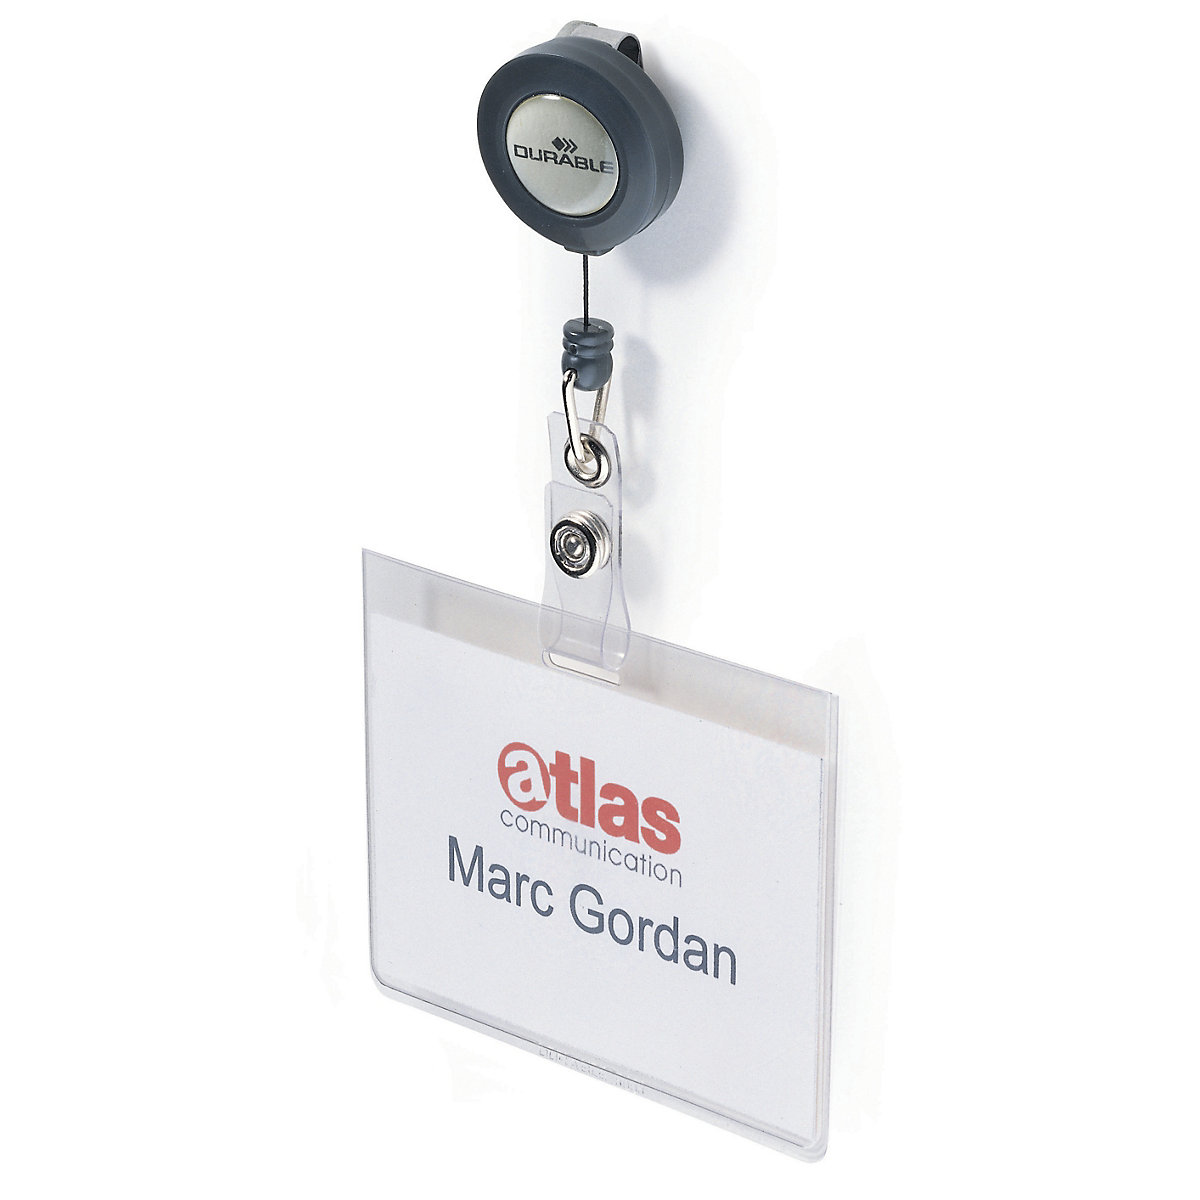 Name badge with retractable string – DURABLE